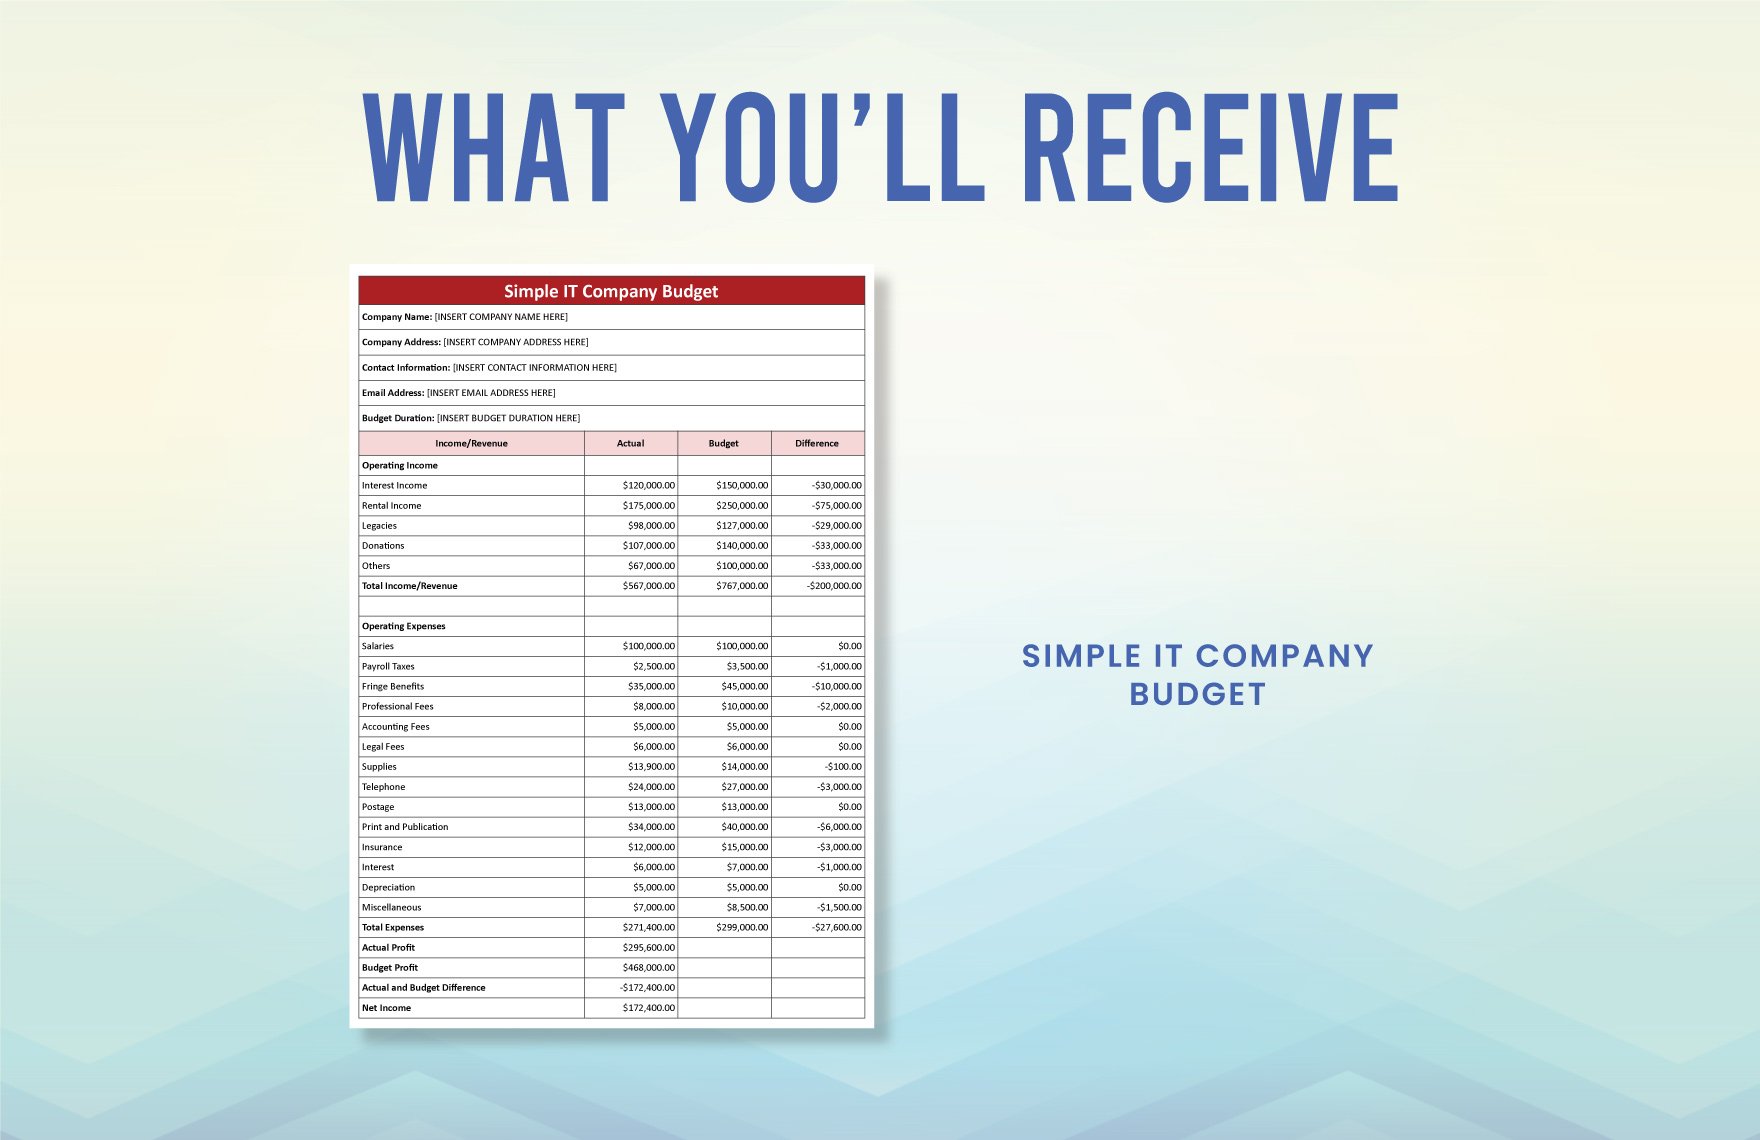 Simple IT Company Budget Template